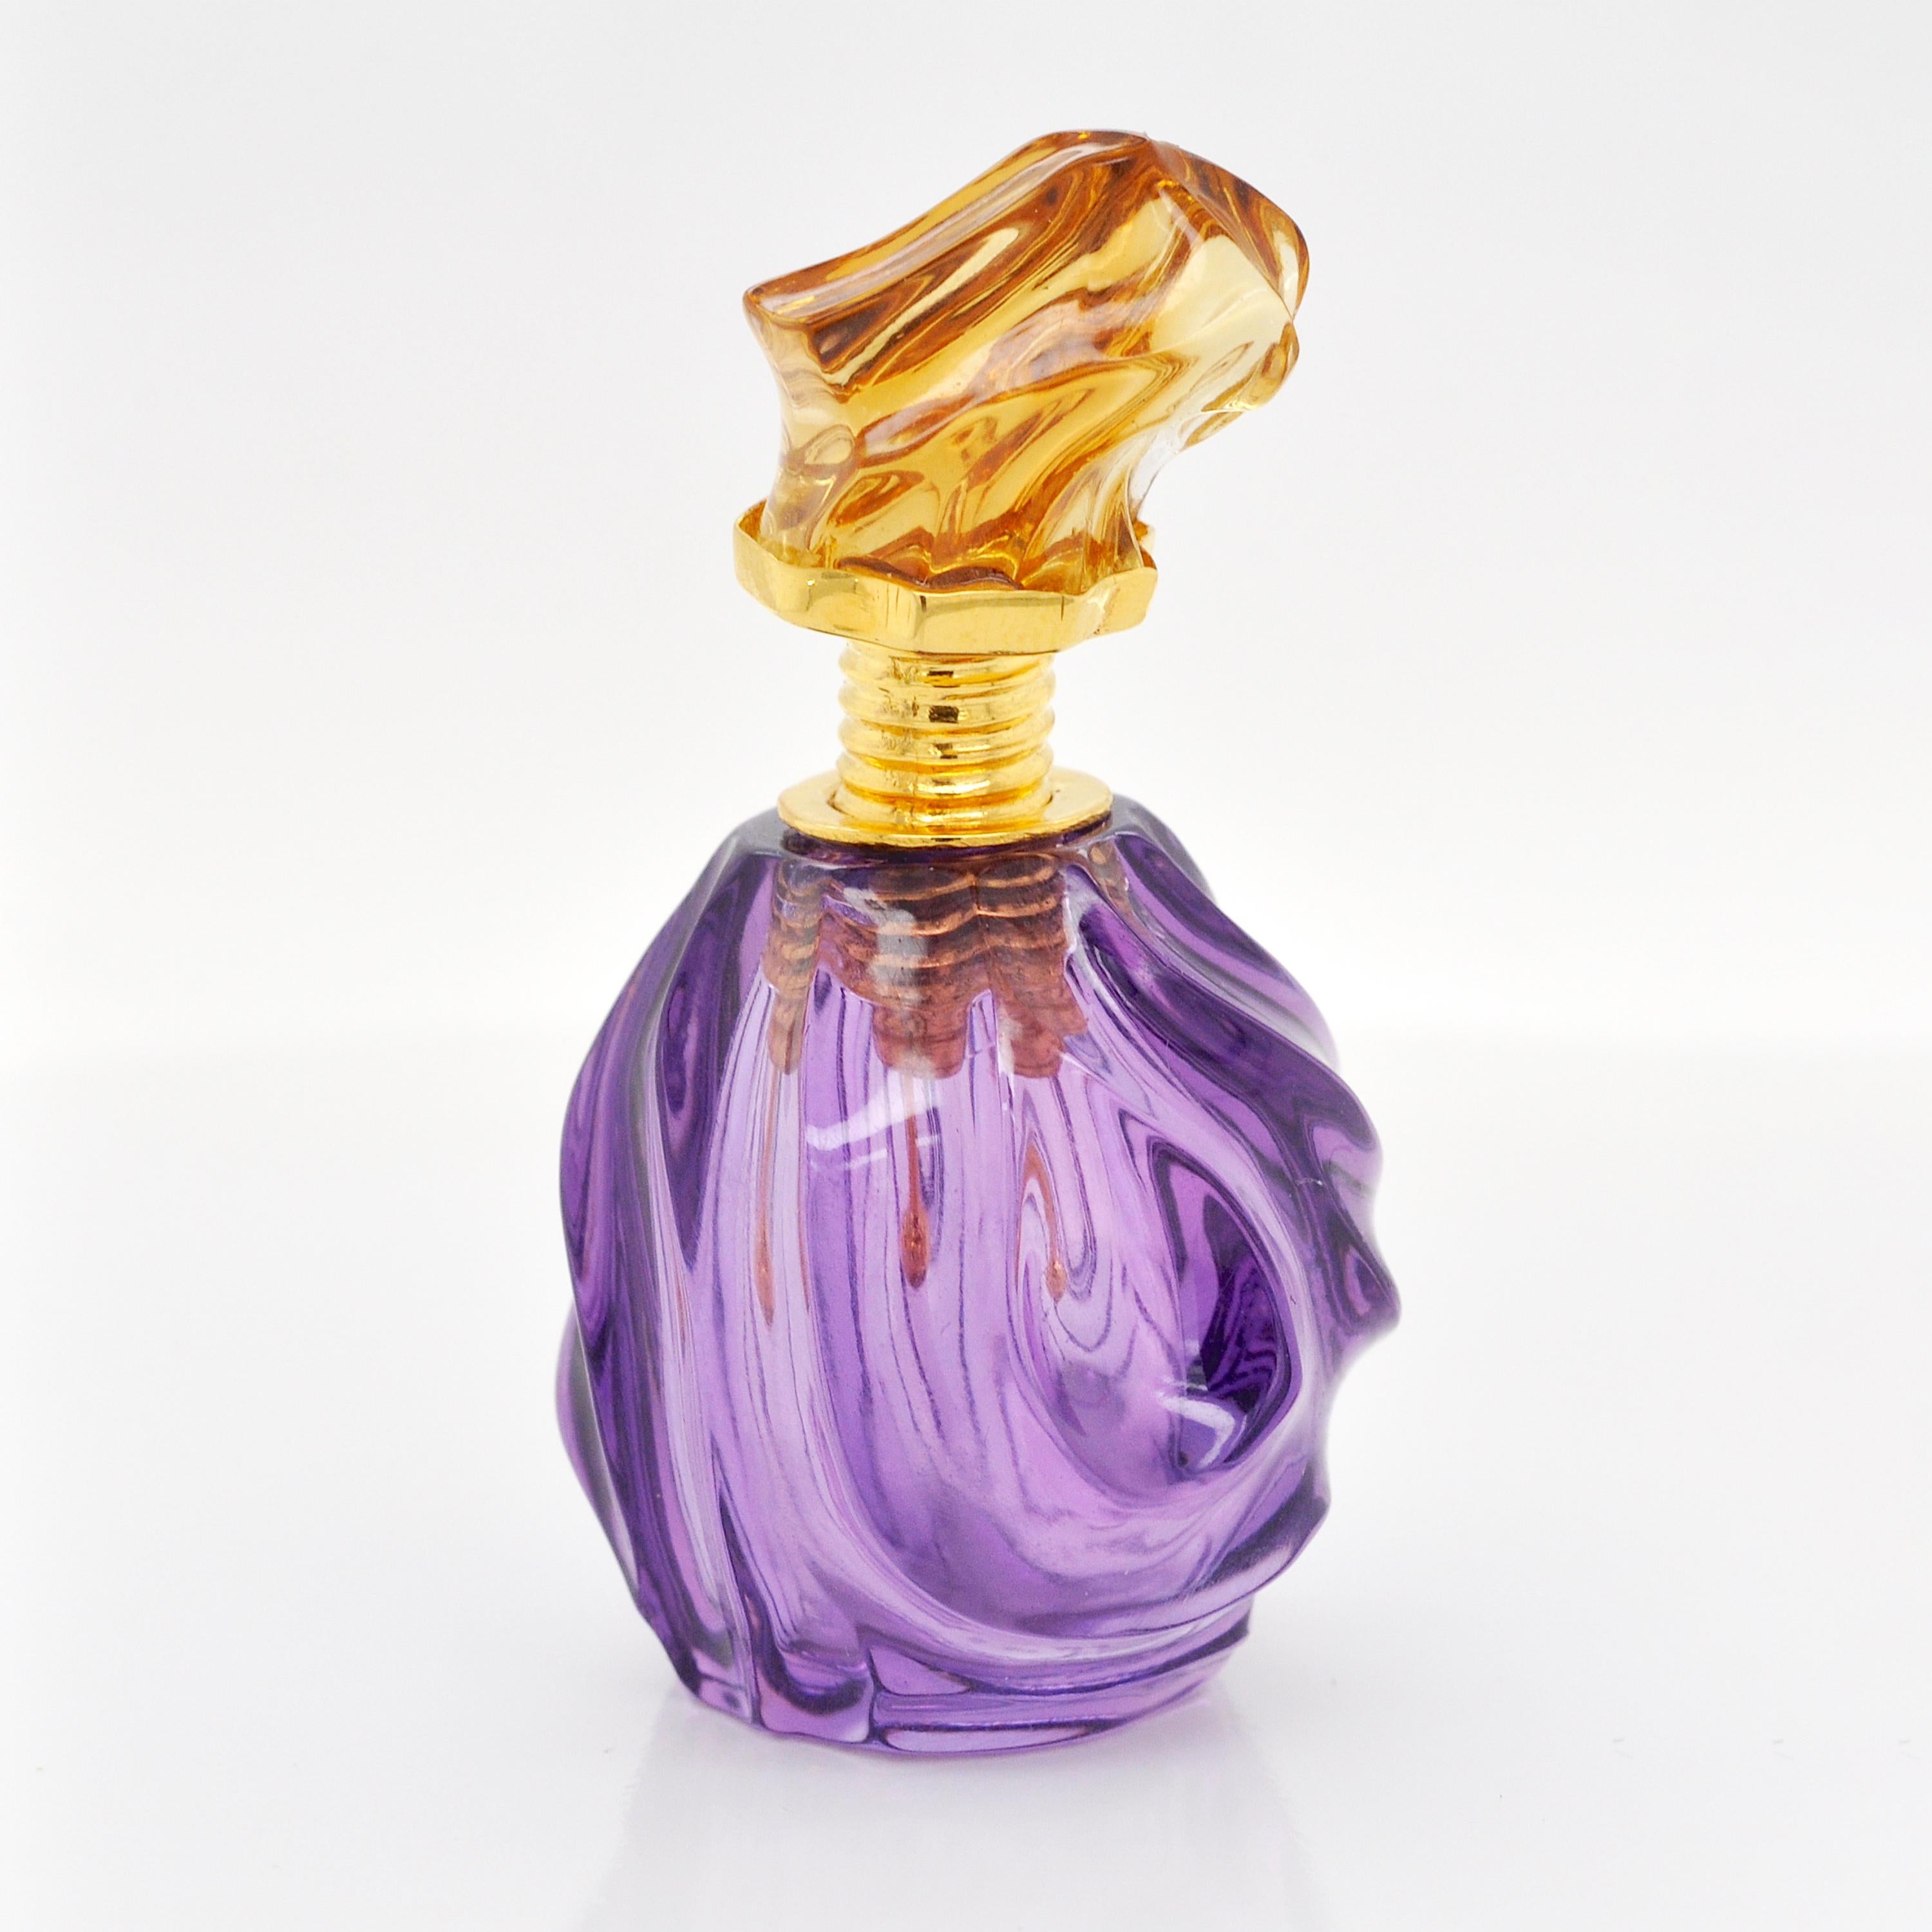 Introducing the stunning perfume bottle, where simplicity meets sophistication for an unforgettable fragrance experience.

Crafted from amethyst, the base features abstract waves carved with precision, creating a mesmerizing pattern that catches the